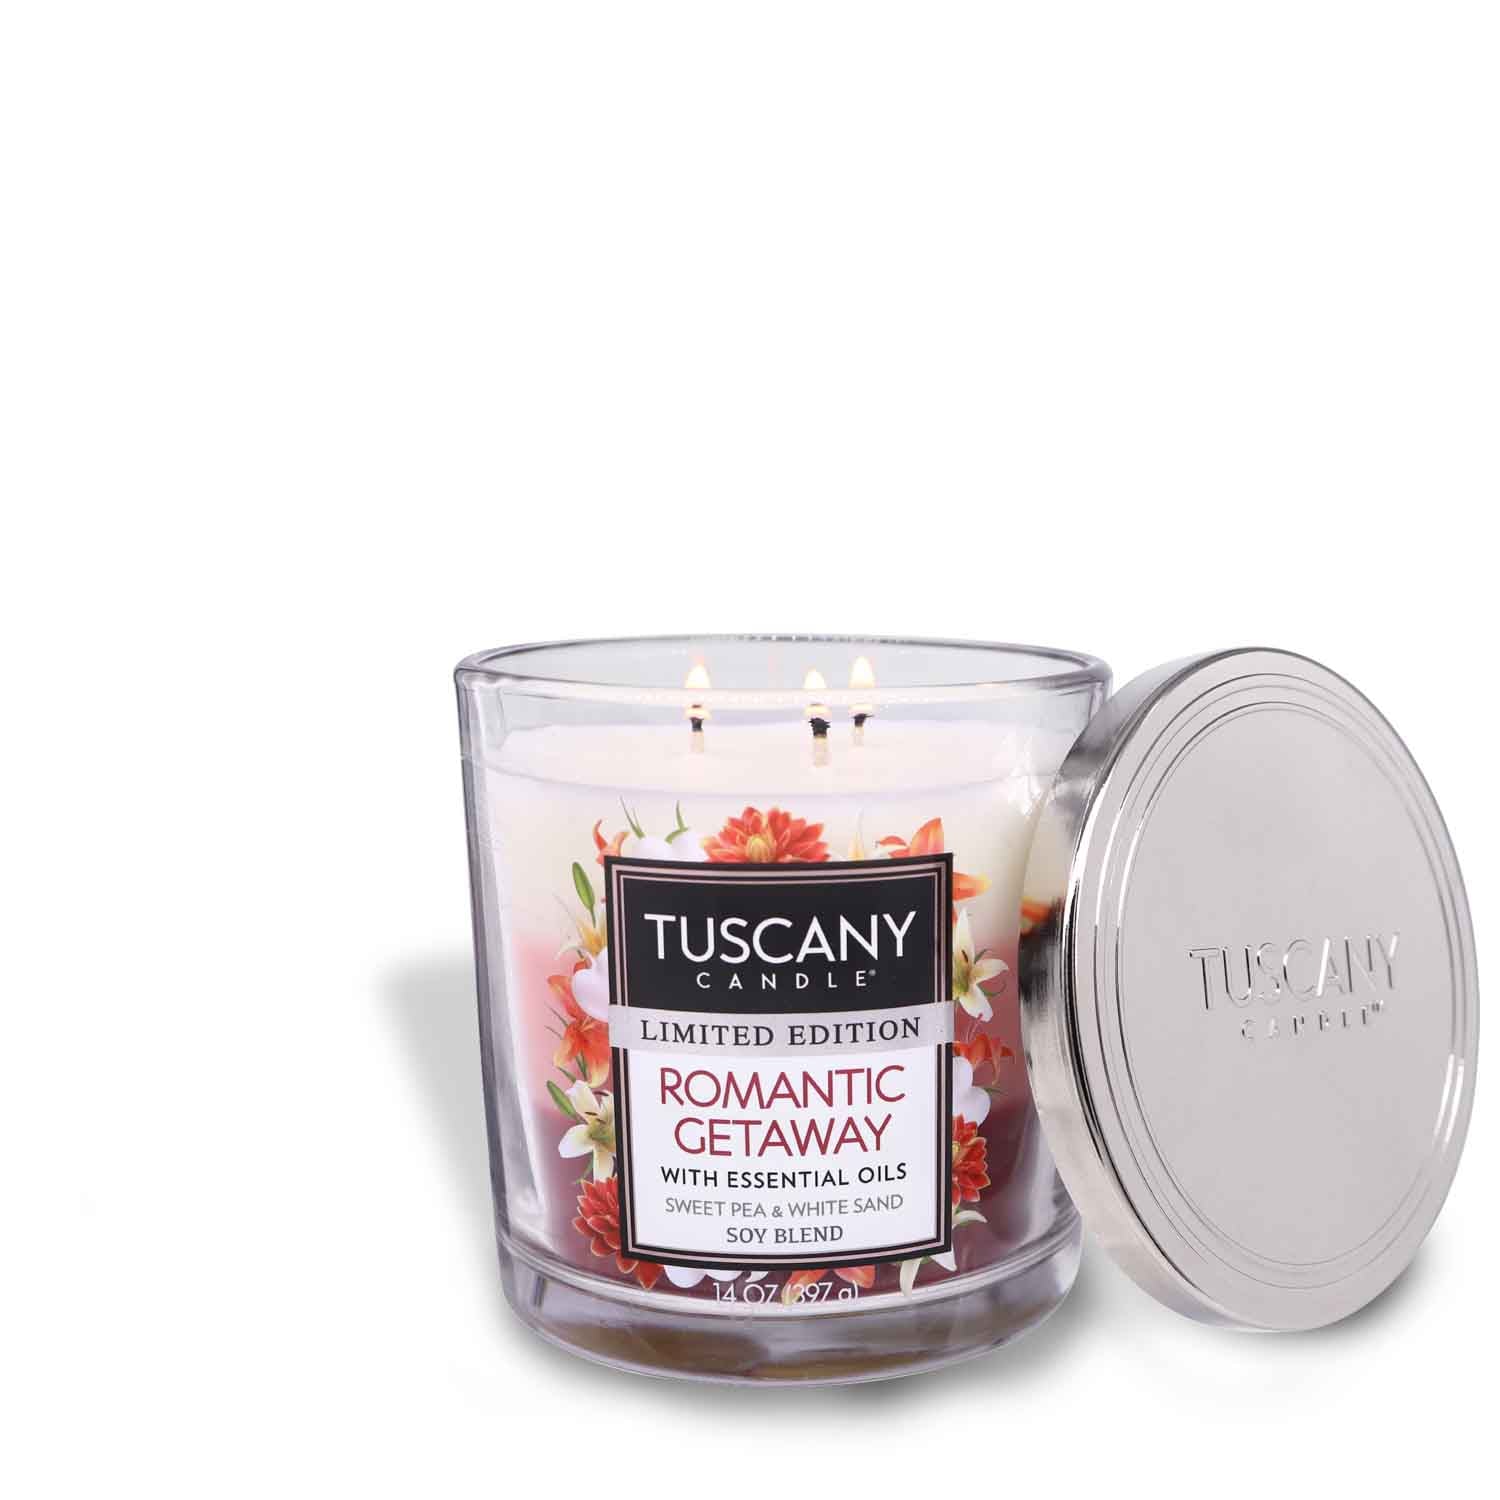 A Romantic Getaway Long-Lasting Scented Jar Candle (14 oz) by Tuscany Candle® SEASONAL.